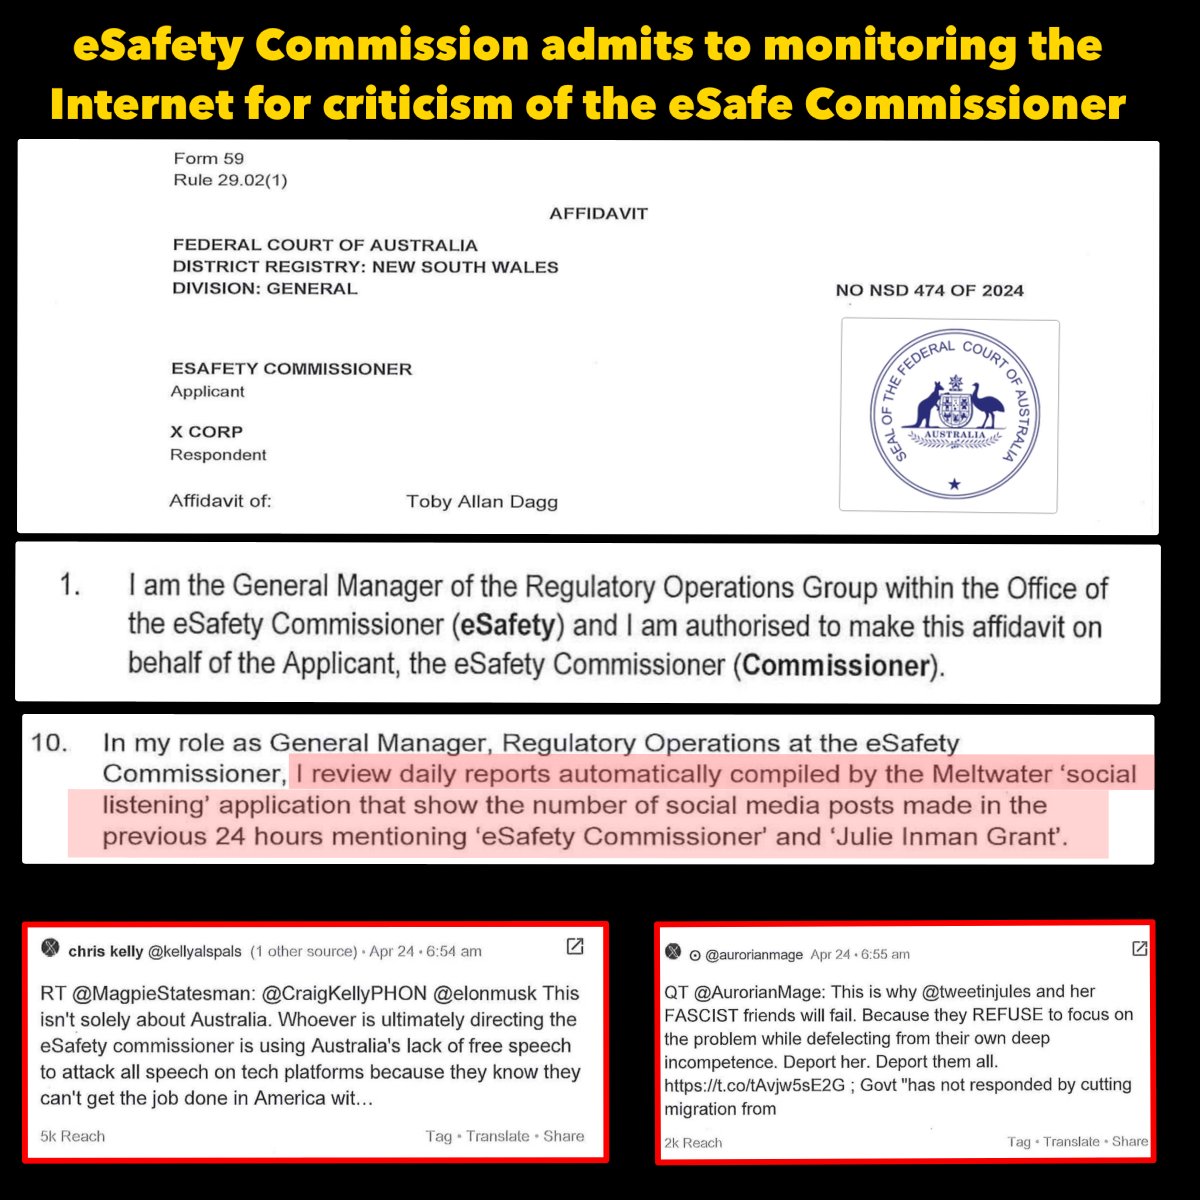 JUST LIKE IN 1984

Documents filed in Federal Court reveal that eSafety Commission has been compiling a daily list of social media posts criticising the eSafety Commissioner. 

So if you’ve criticised the eSafety Commissioner, with comments such she’s 'an out of control